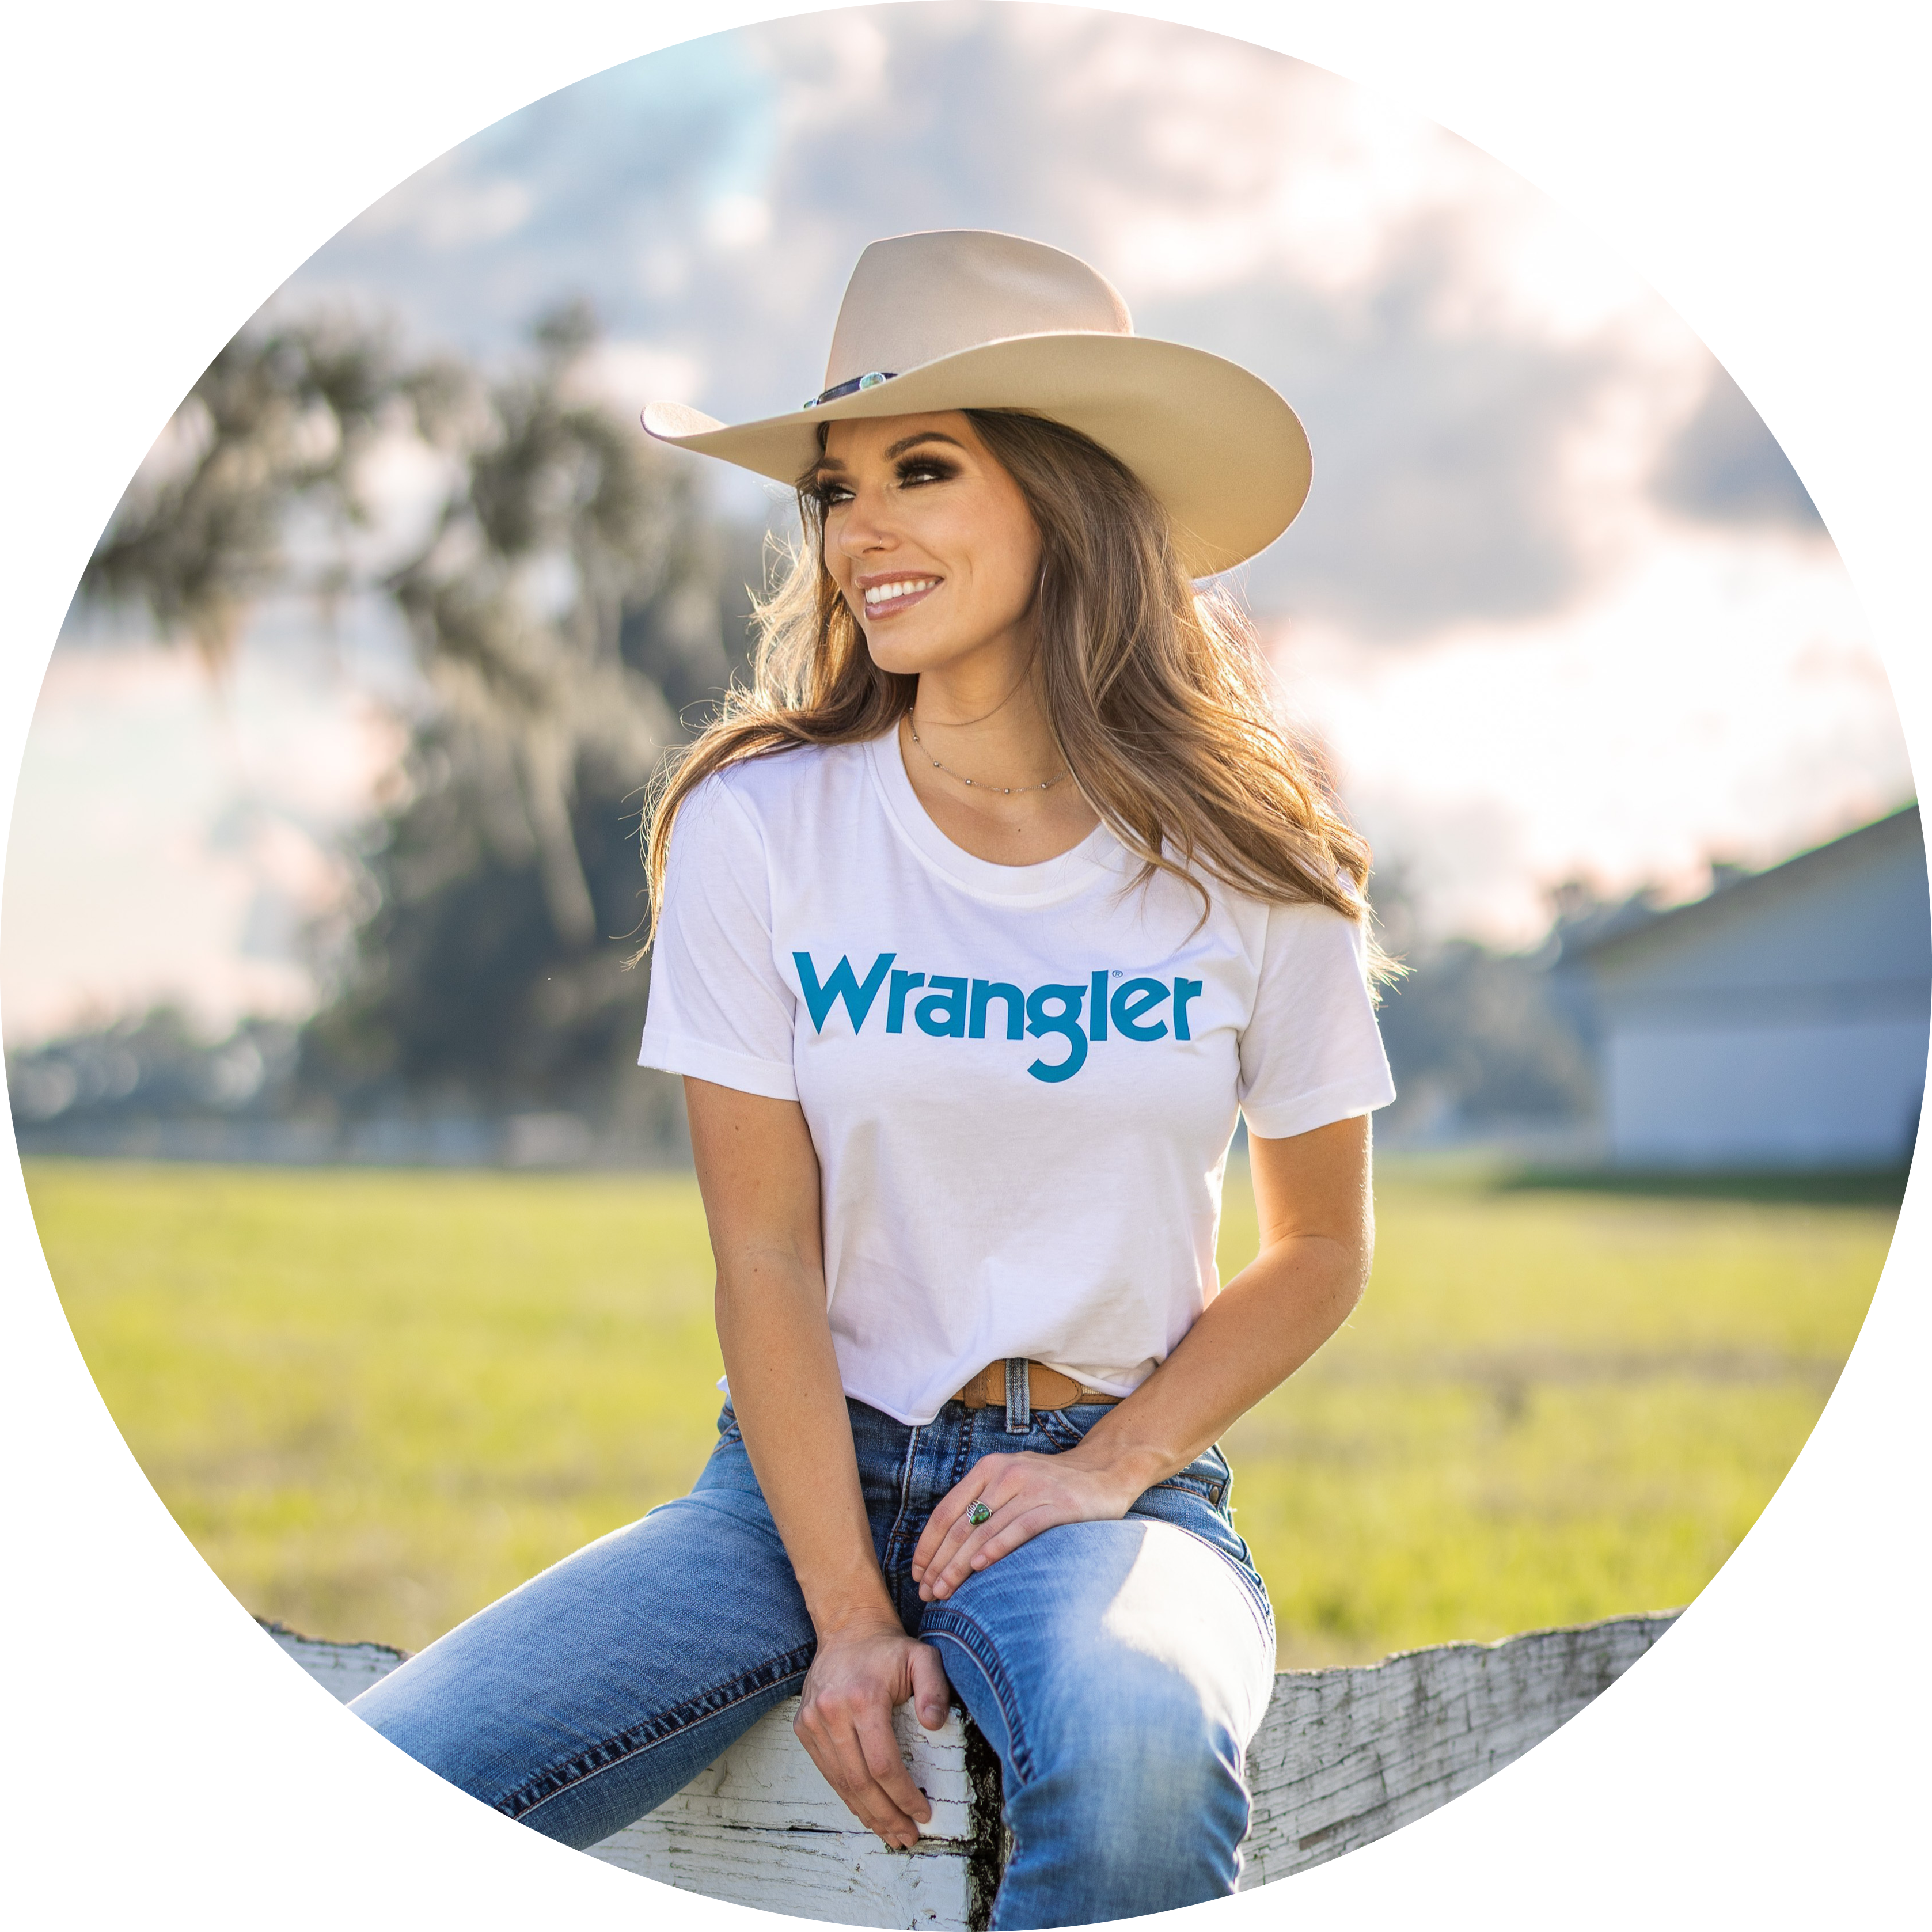 Olana sitting on a wooden fence looking to the left, wearing a cowgirl hat, white Wrangler shirt, and blue jeans